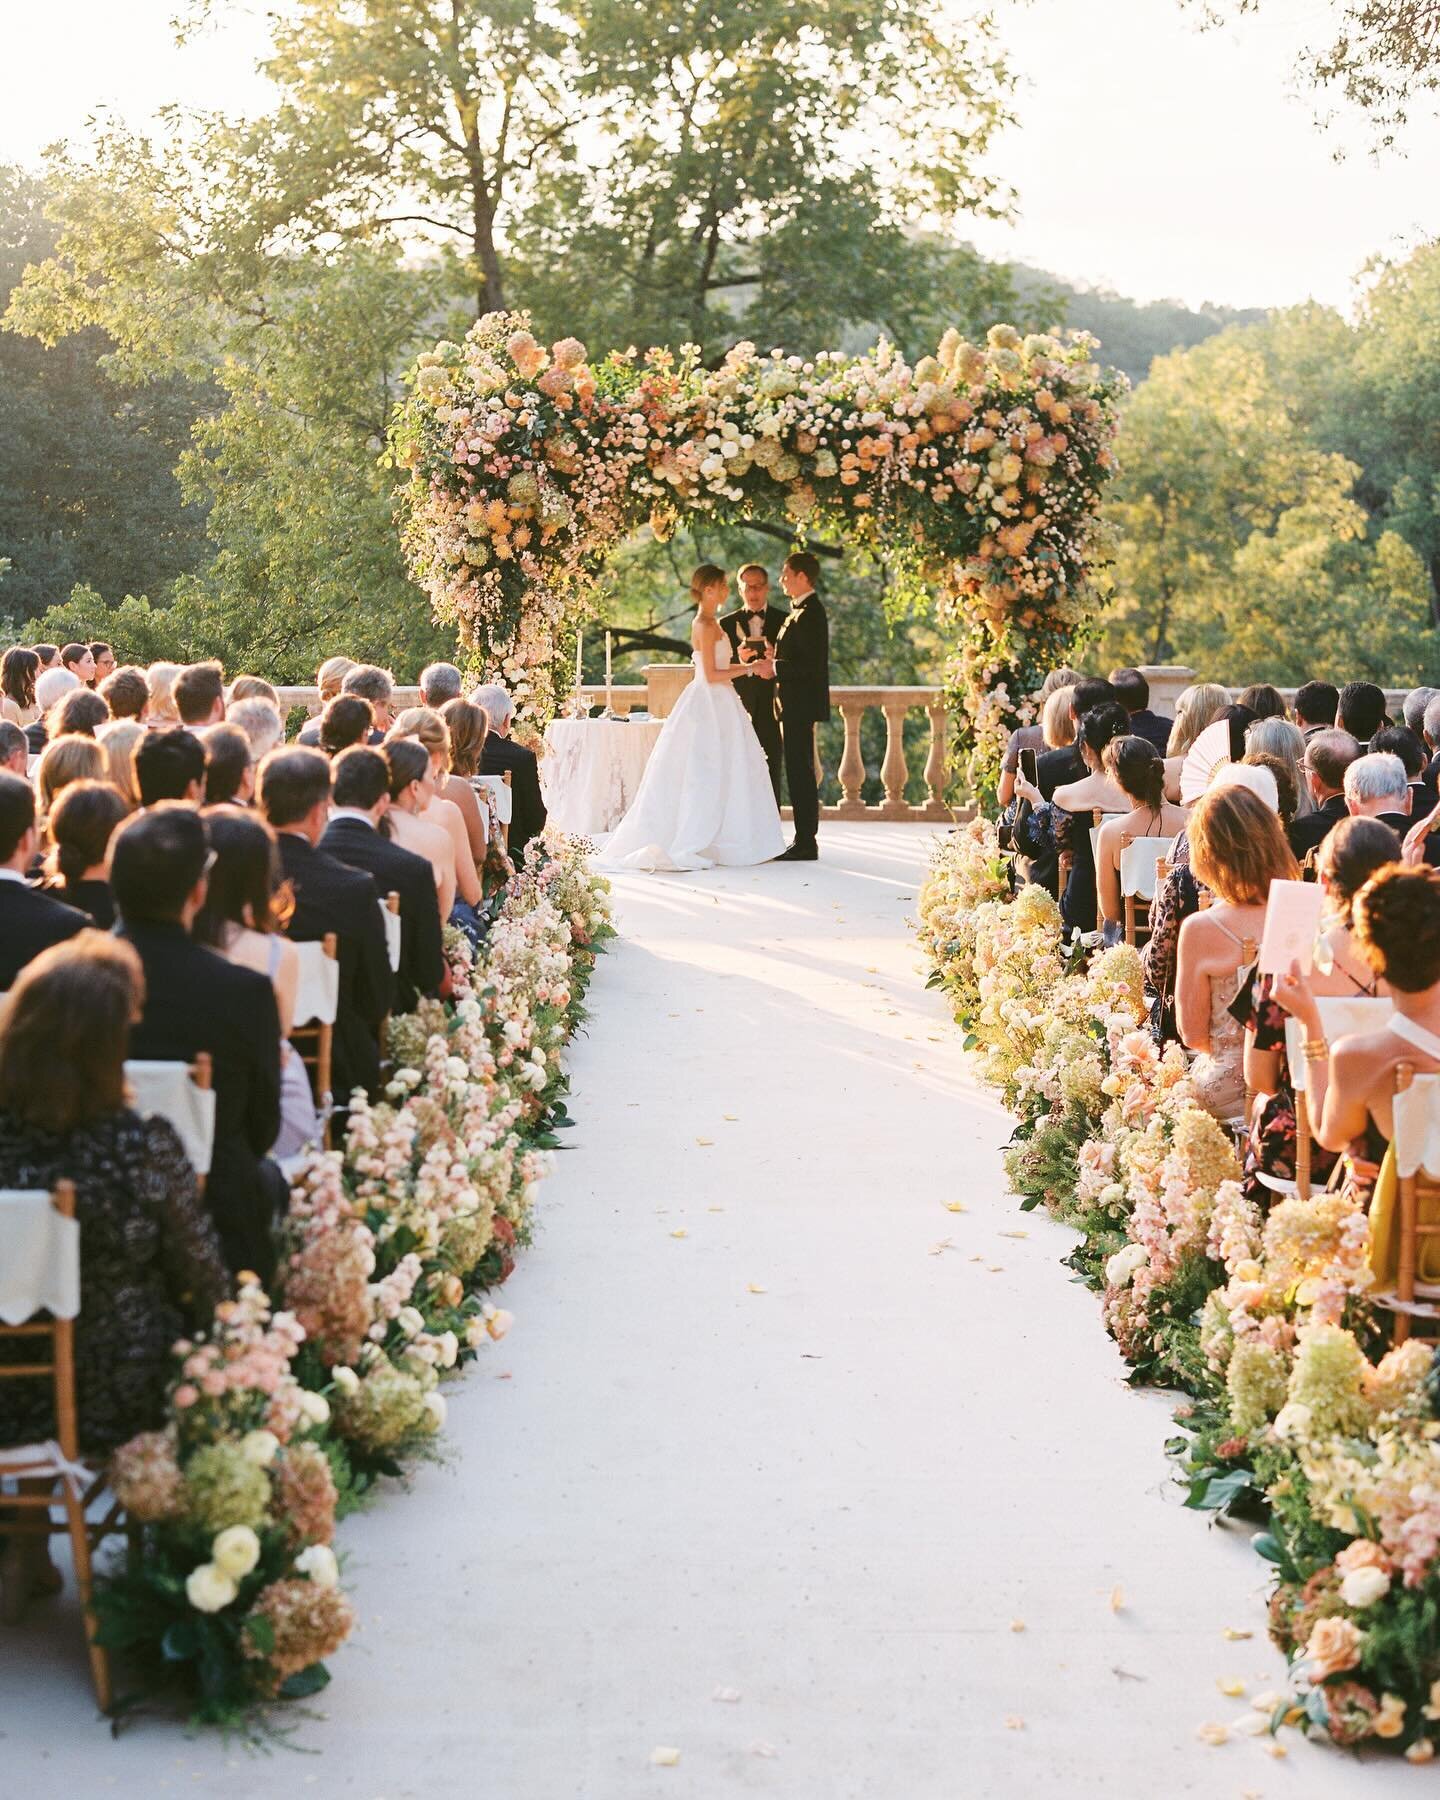 Exchanging vows in the privacy of your own backyard might be a dream come true. It was incredibly important to the bride and groom that their guests not only witnessed the exchange of vows but also felt intimately connected. We designed a structure w